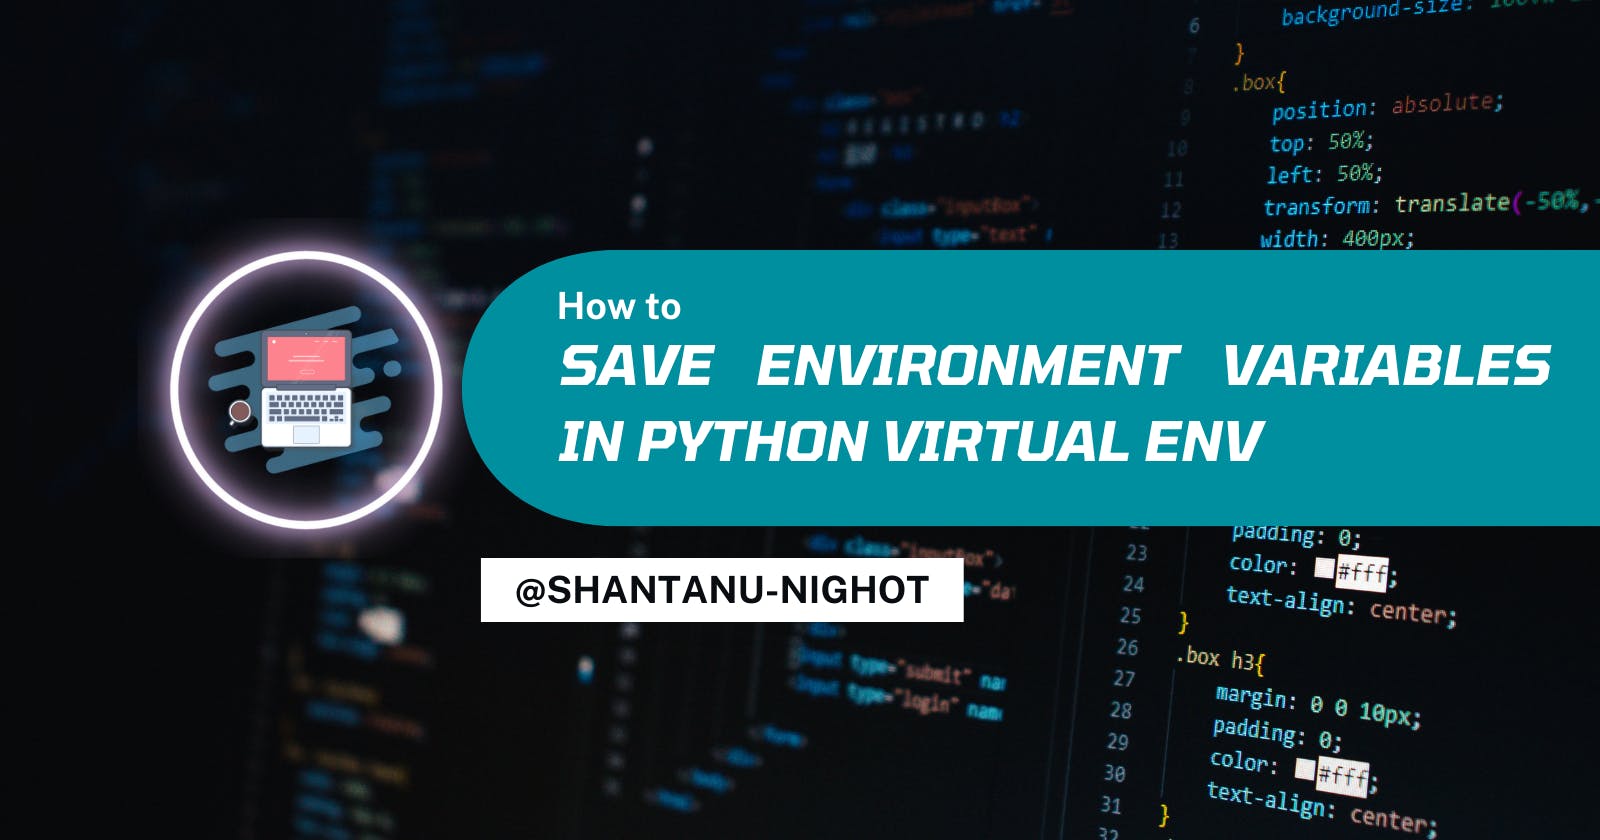 How to save Environment Variables in Python virtual env